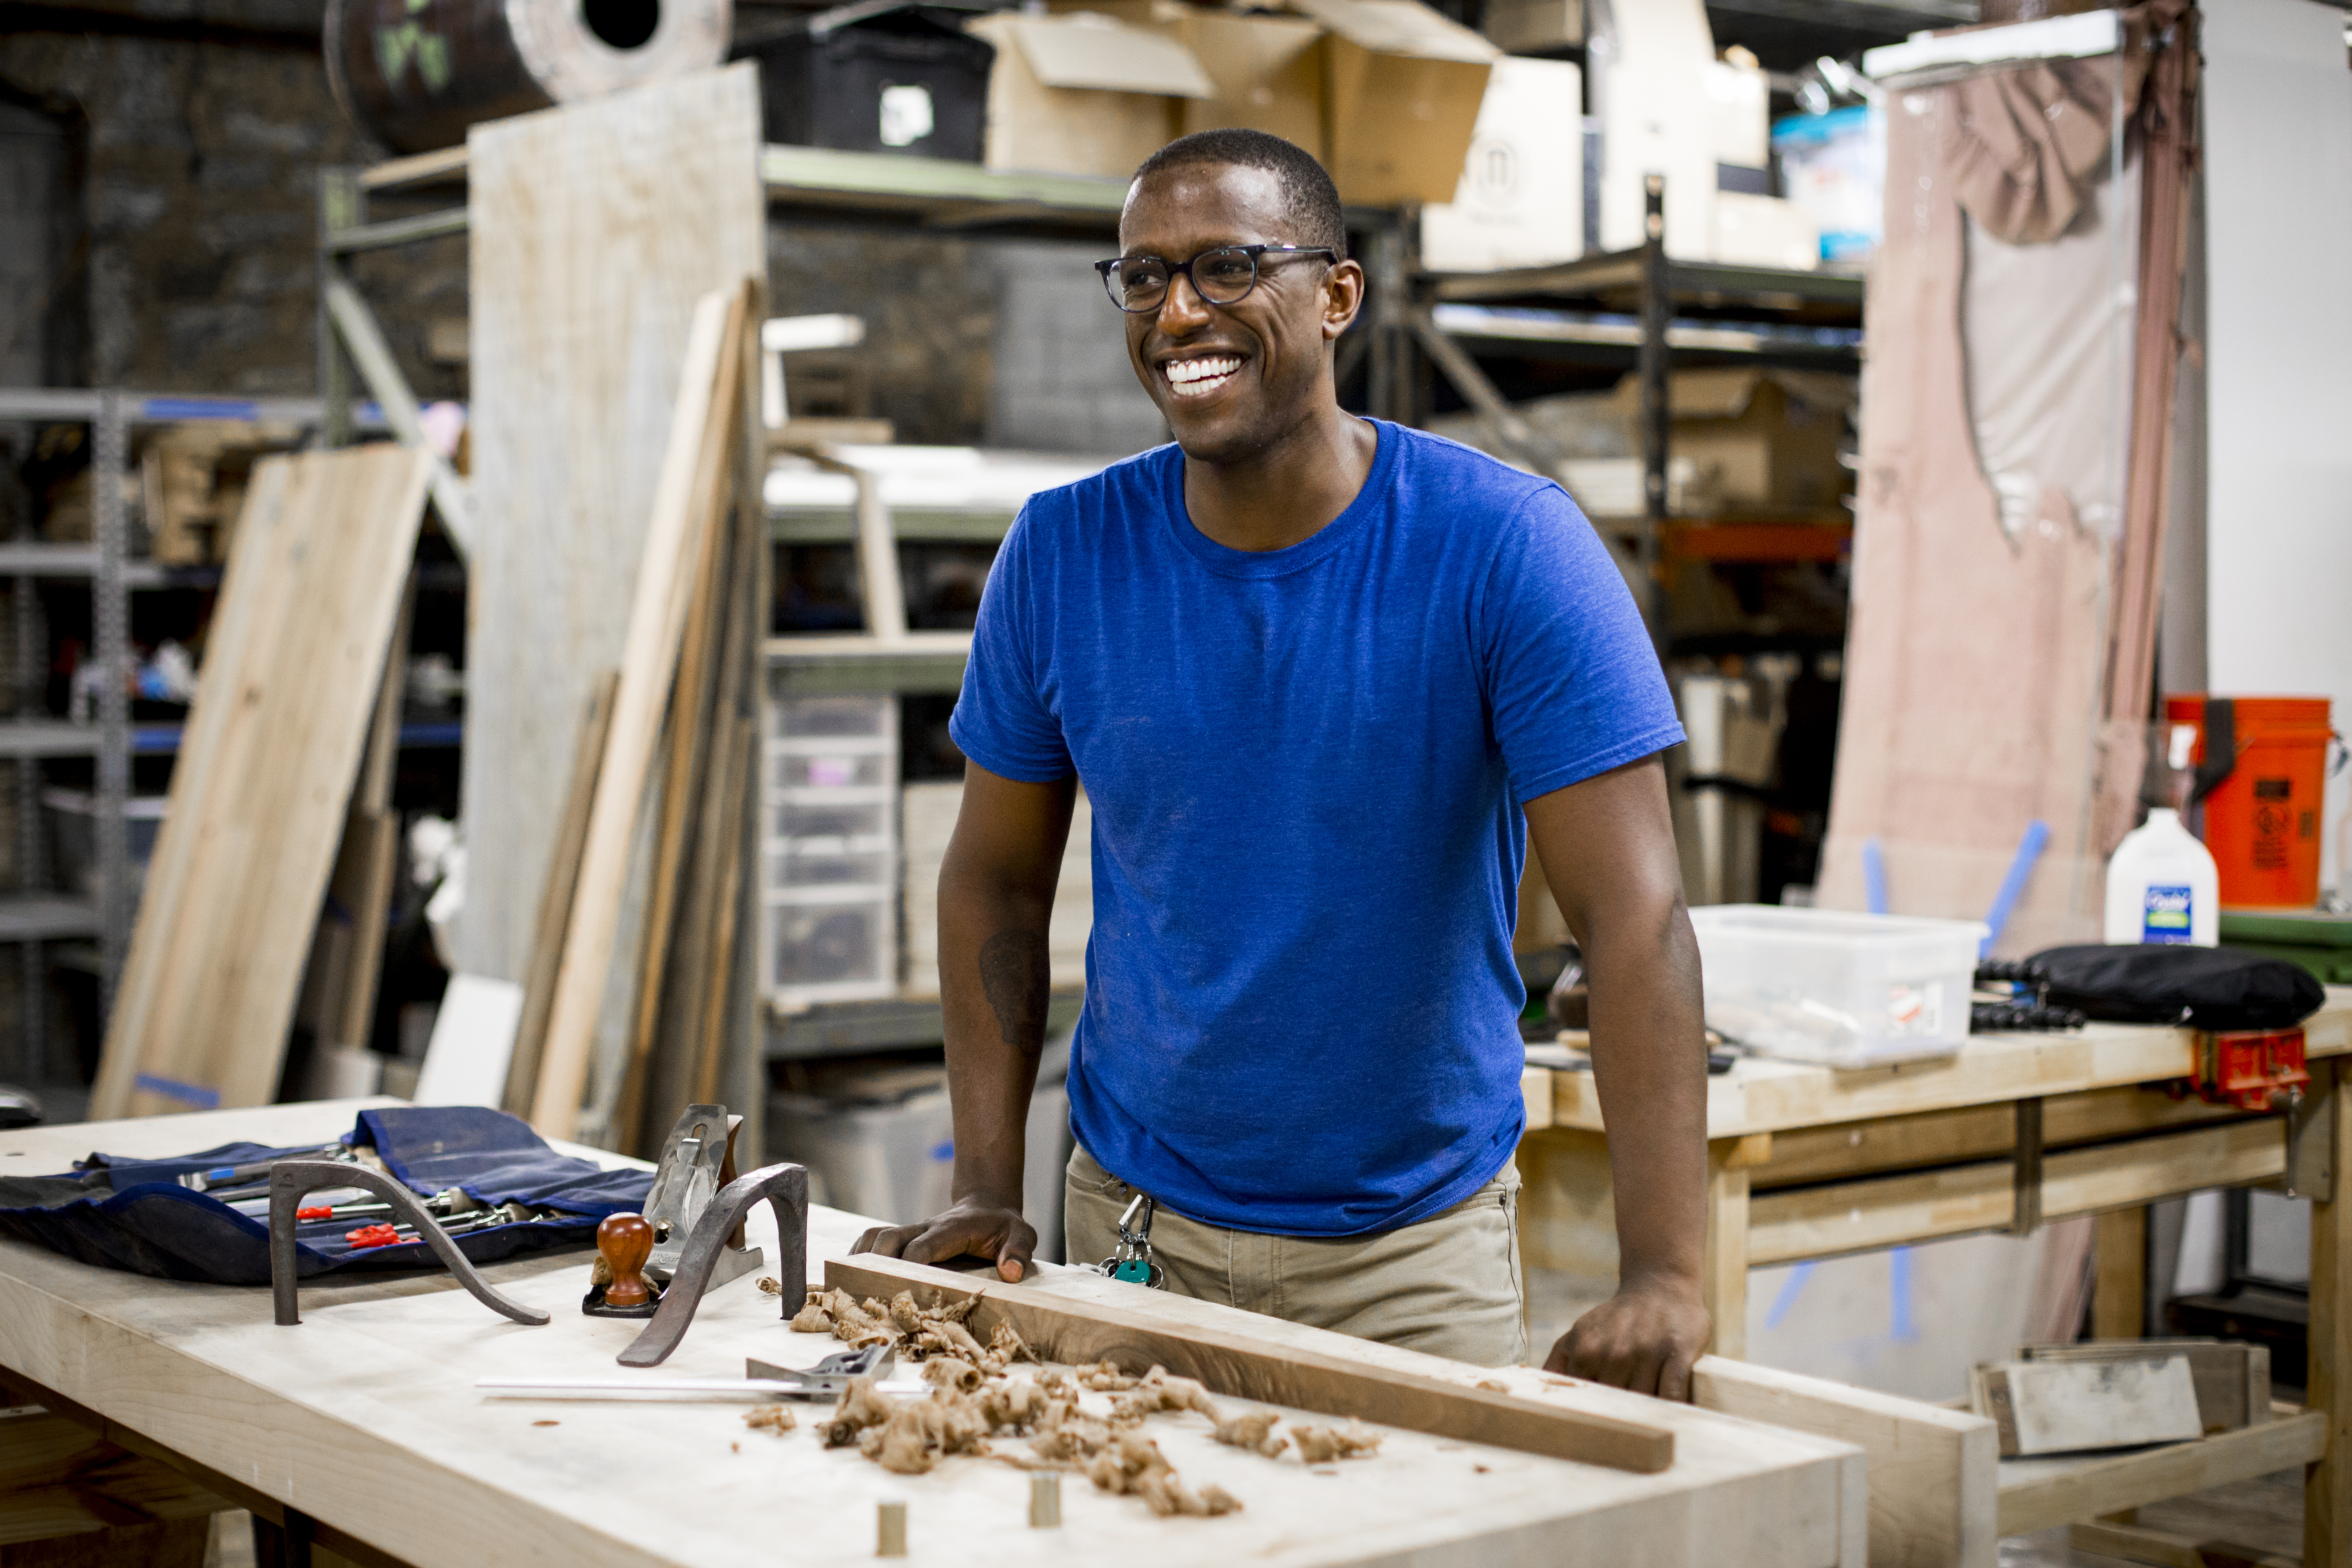 Robell smiling and standing at a workbench. On the bench is a table leg and wood shavings.